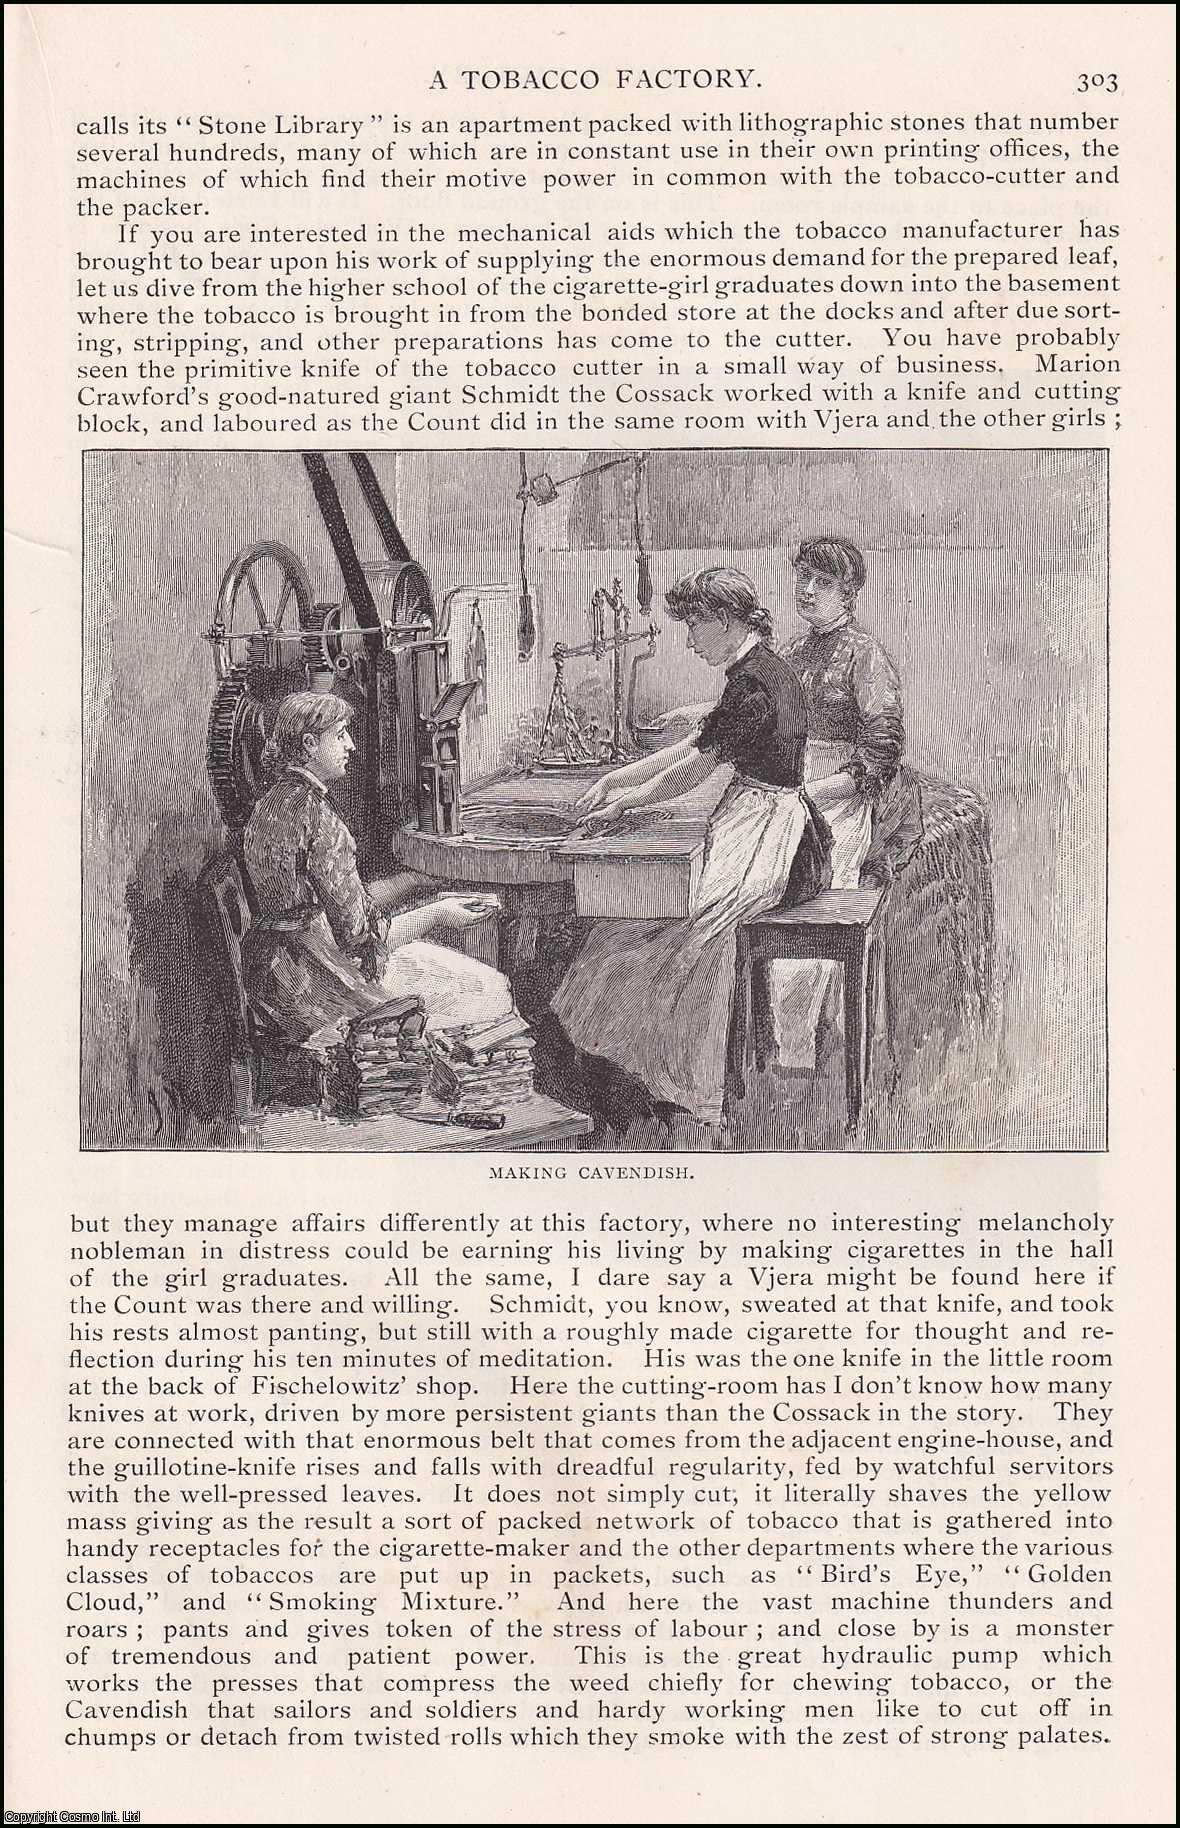 Joseph Hatton, illustrations by John Wallace - A Tobacco Factory. An original article from the English Illustrated Magazine, 1892.